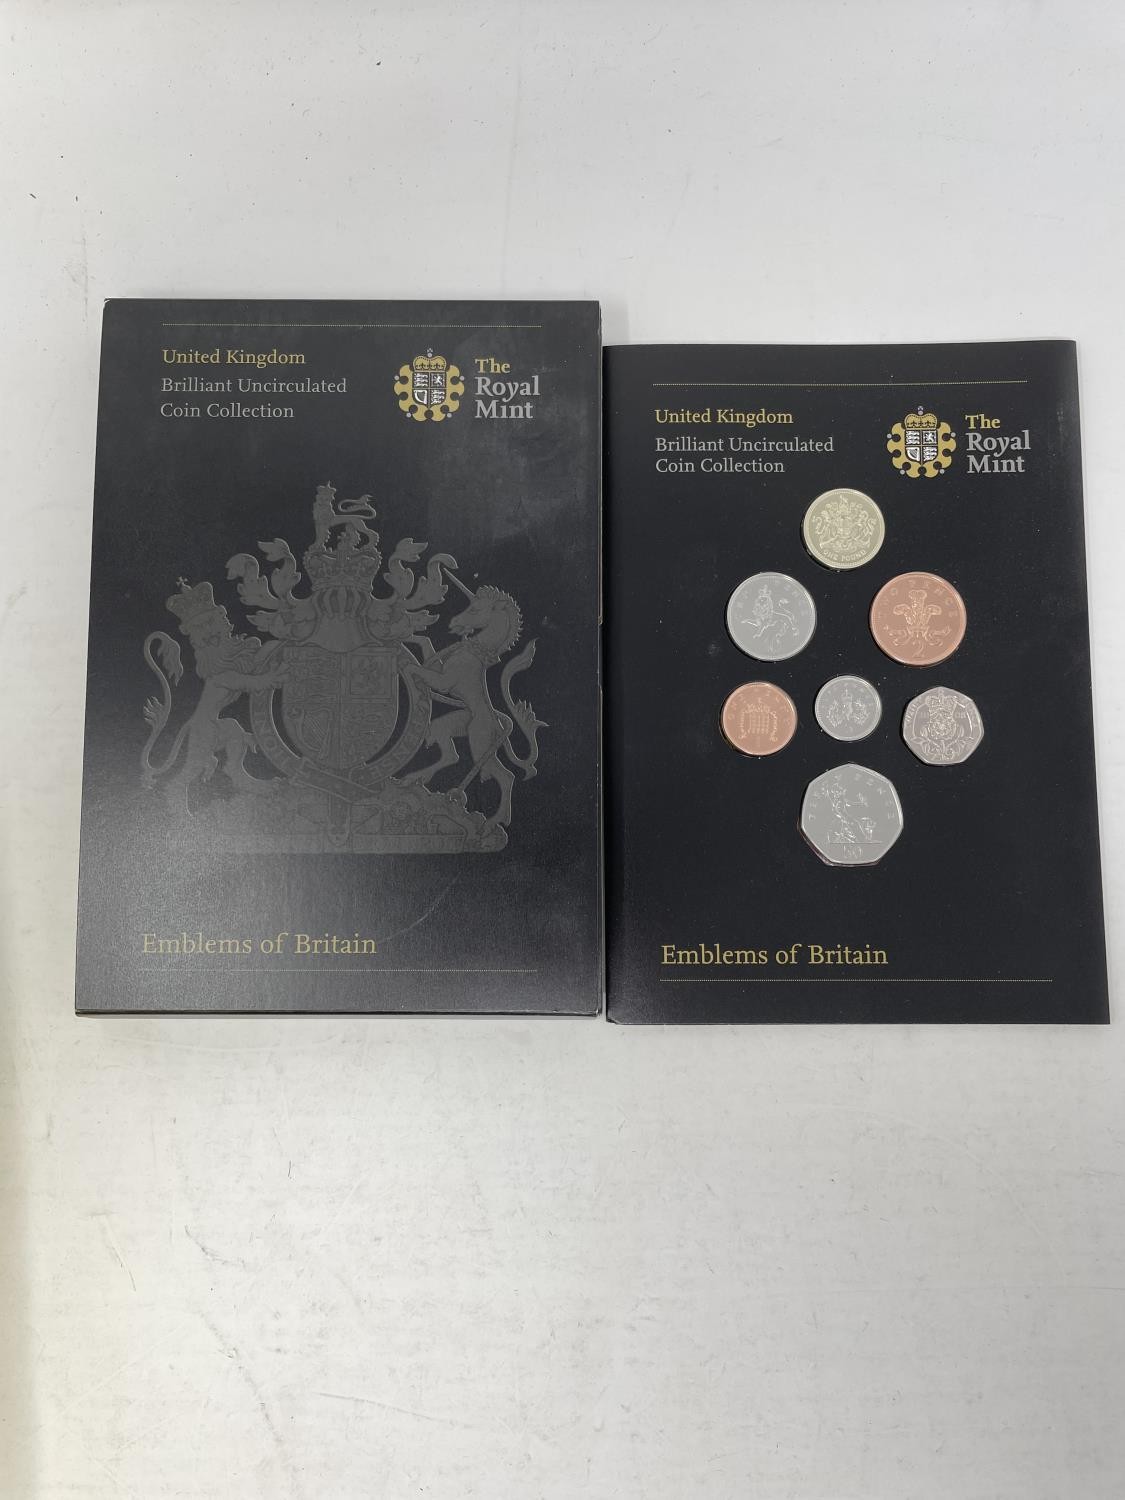 A Brilliant Uncirculated Coin Collection Emblems of Britain coin set, and other coins sets